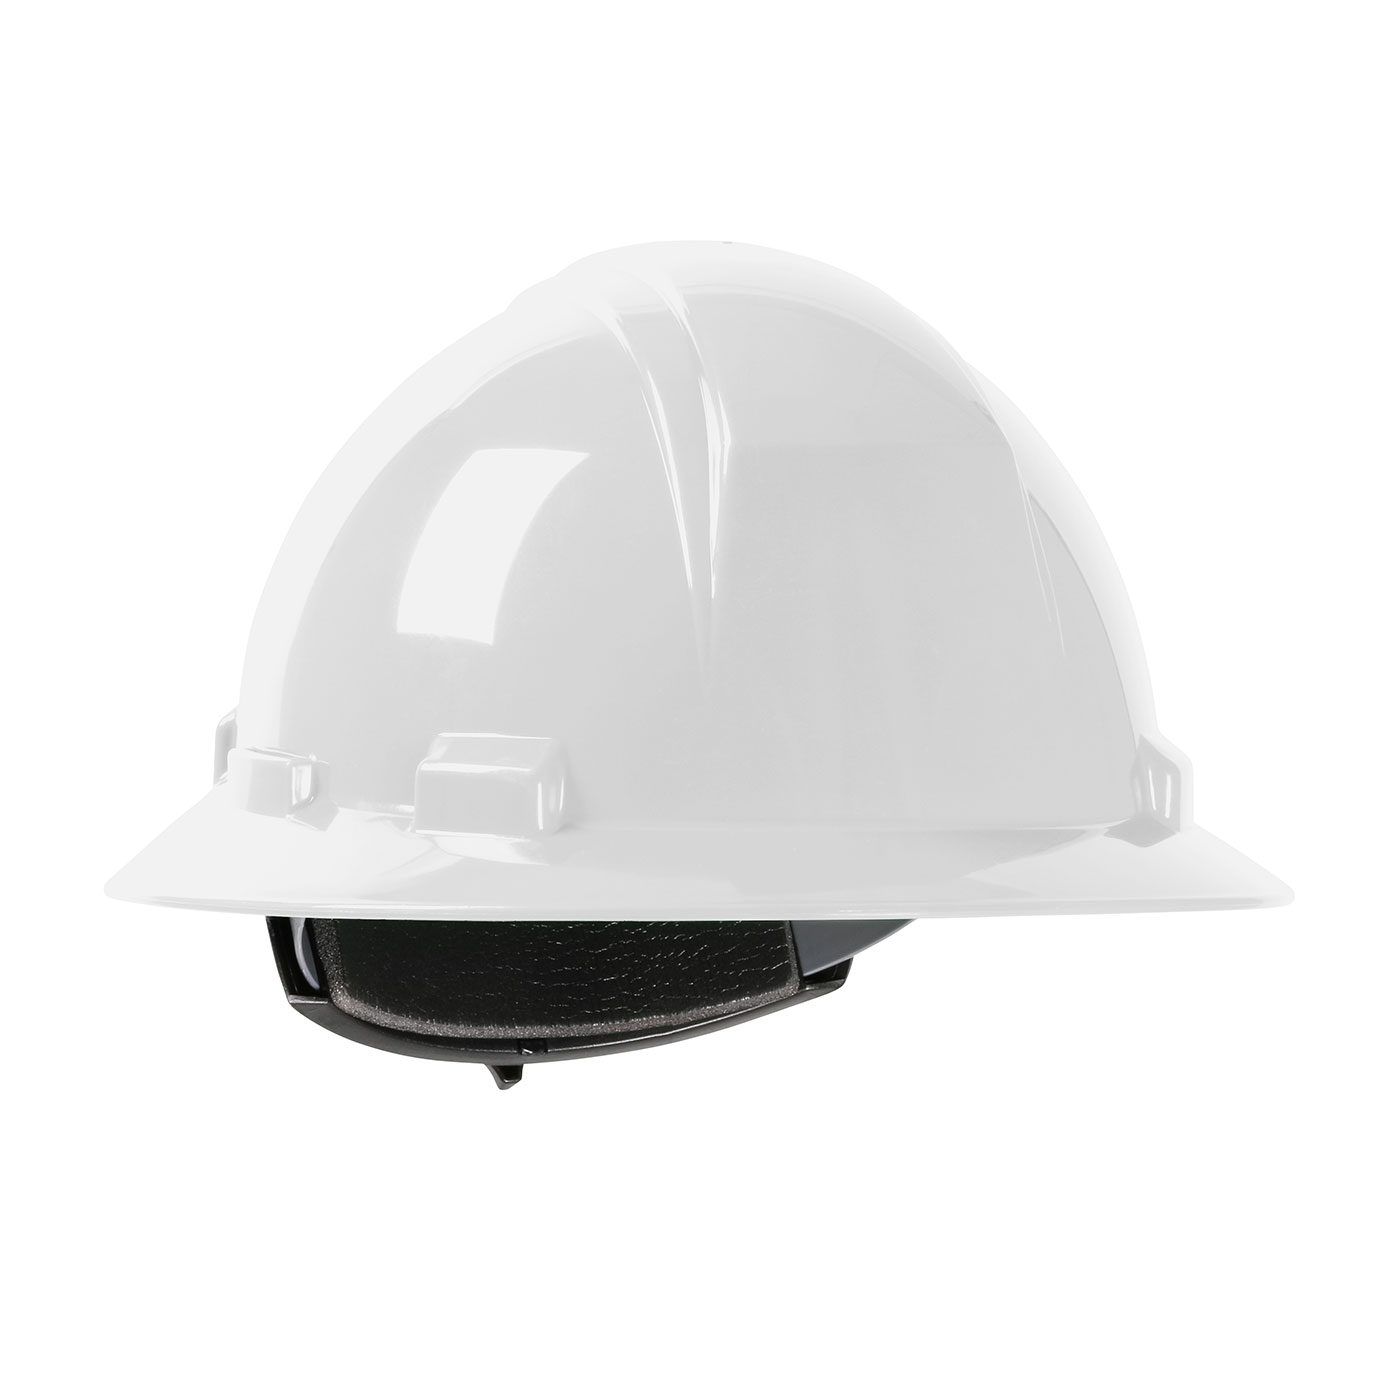 PIP® Dynamic Kilimanjaro™ 280-HP641R-01 Full Brim Hard Hat with HDPE Shell, 4 Point Textile Suspension and Wheel Ratchet Adjustment, White